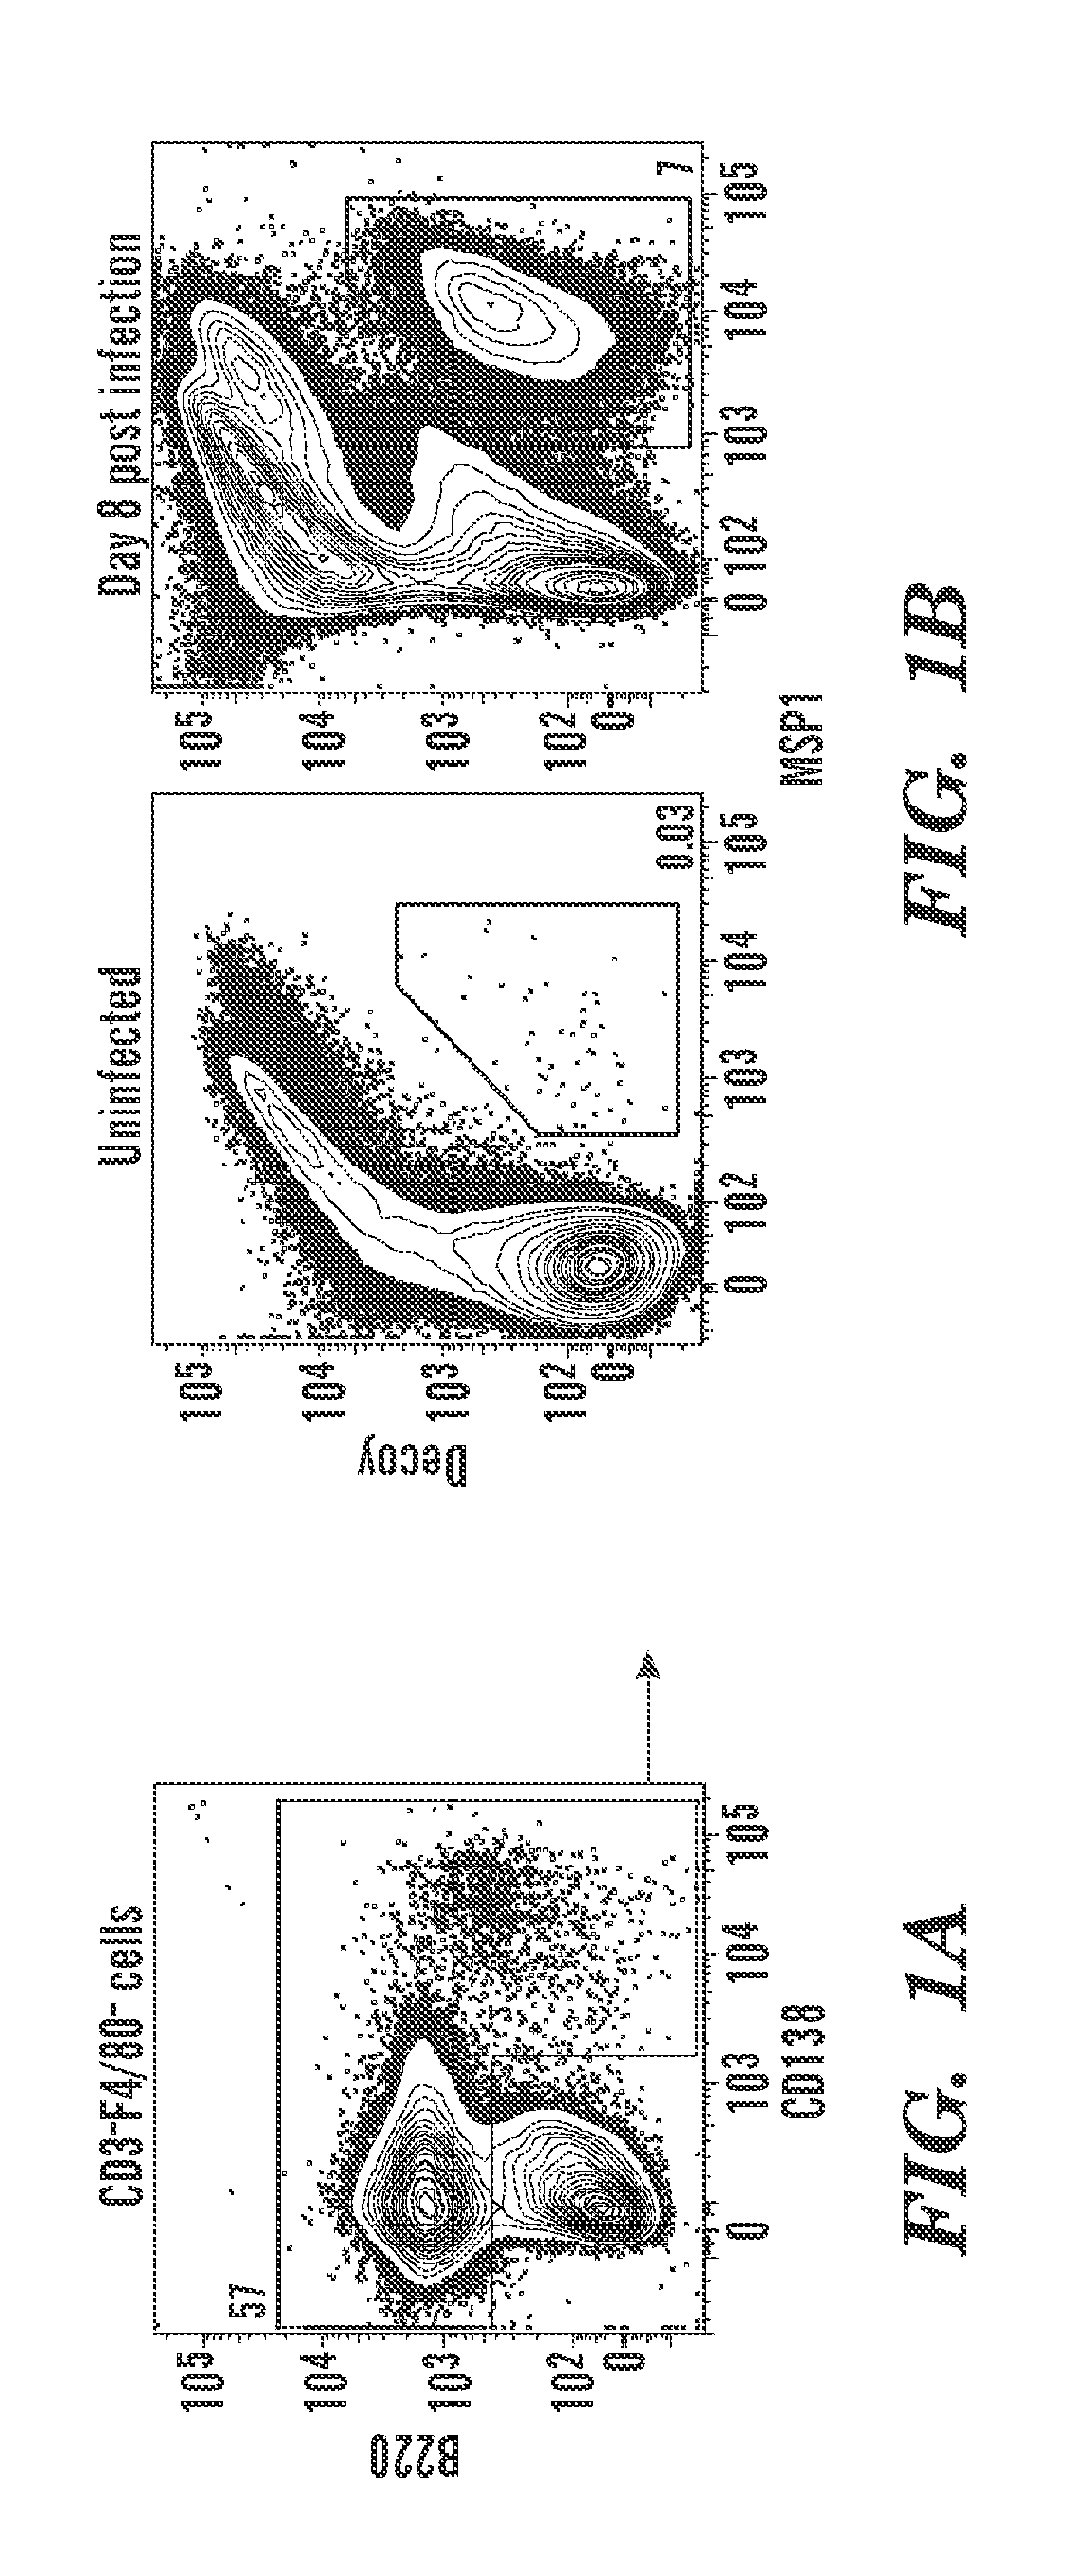 Identification and production of high affinity igm antibodies and derivatives thereof